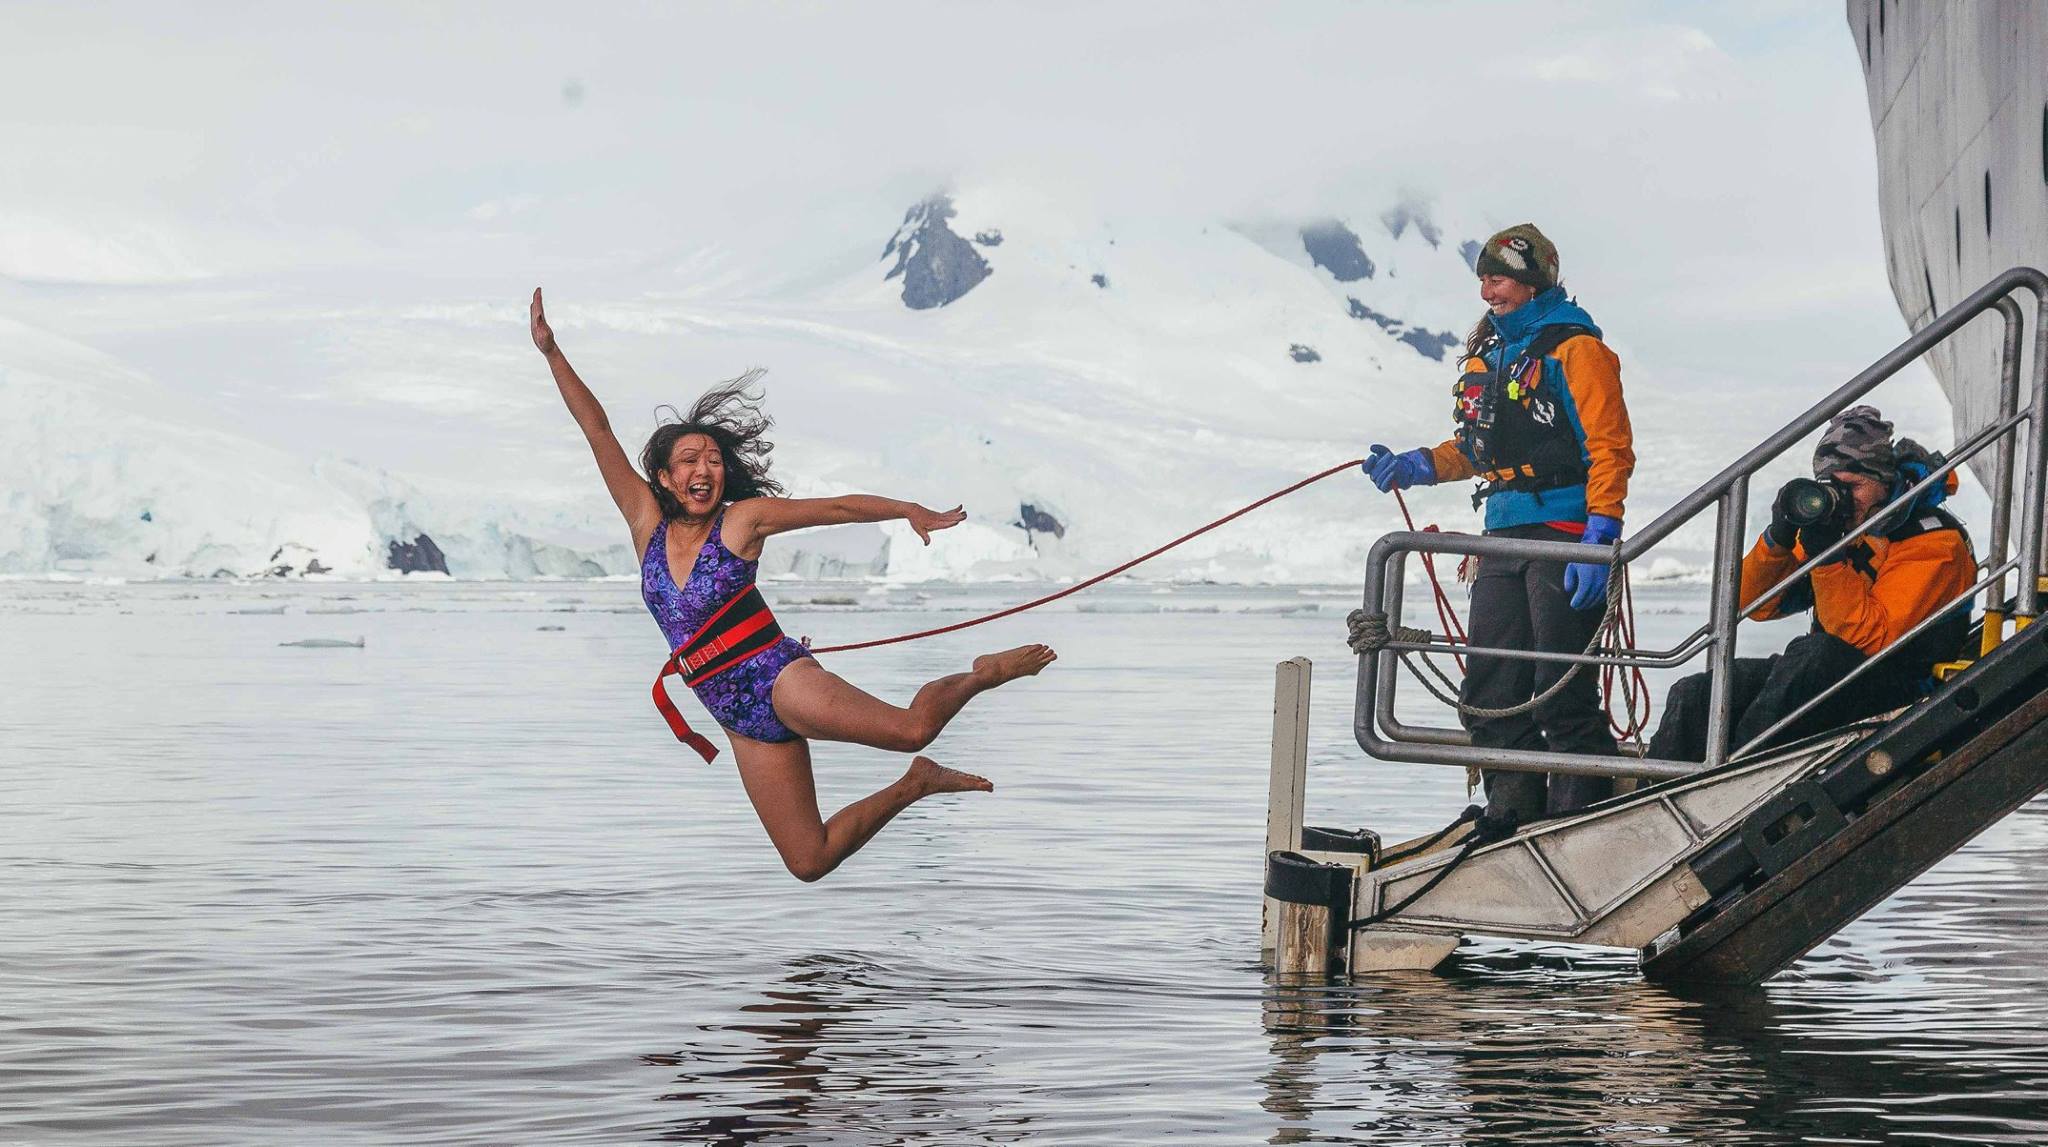 May Lee soars off the gangplank into an icy Antarctic bay during the Polar Plunge, a popular rite of passage on polar expeditions